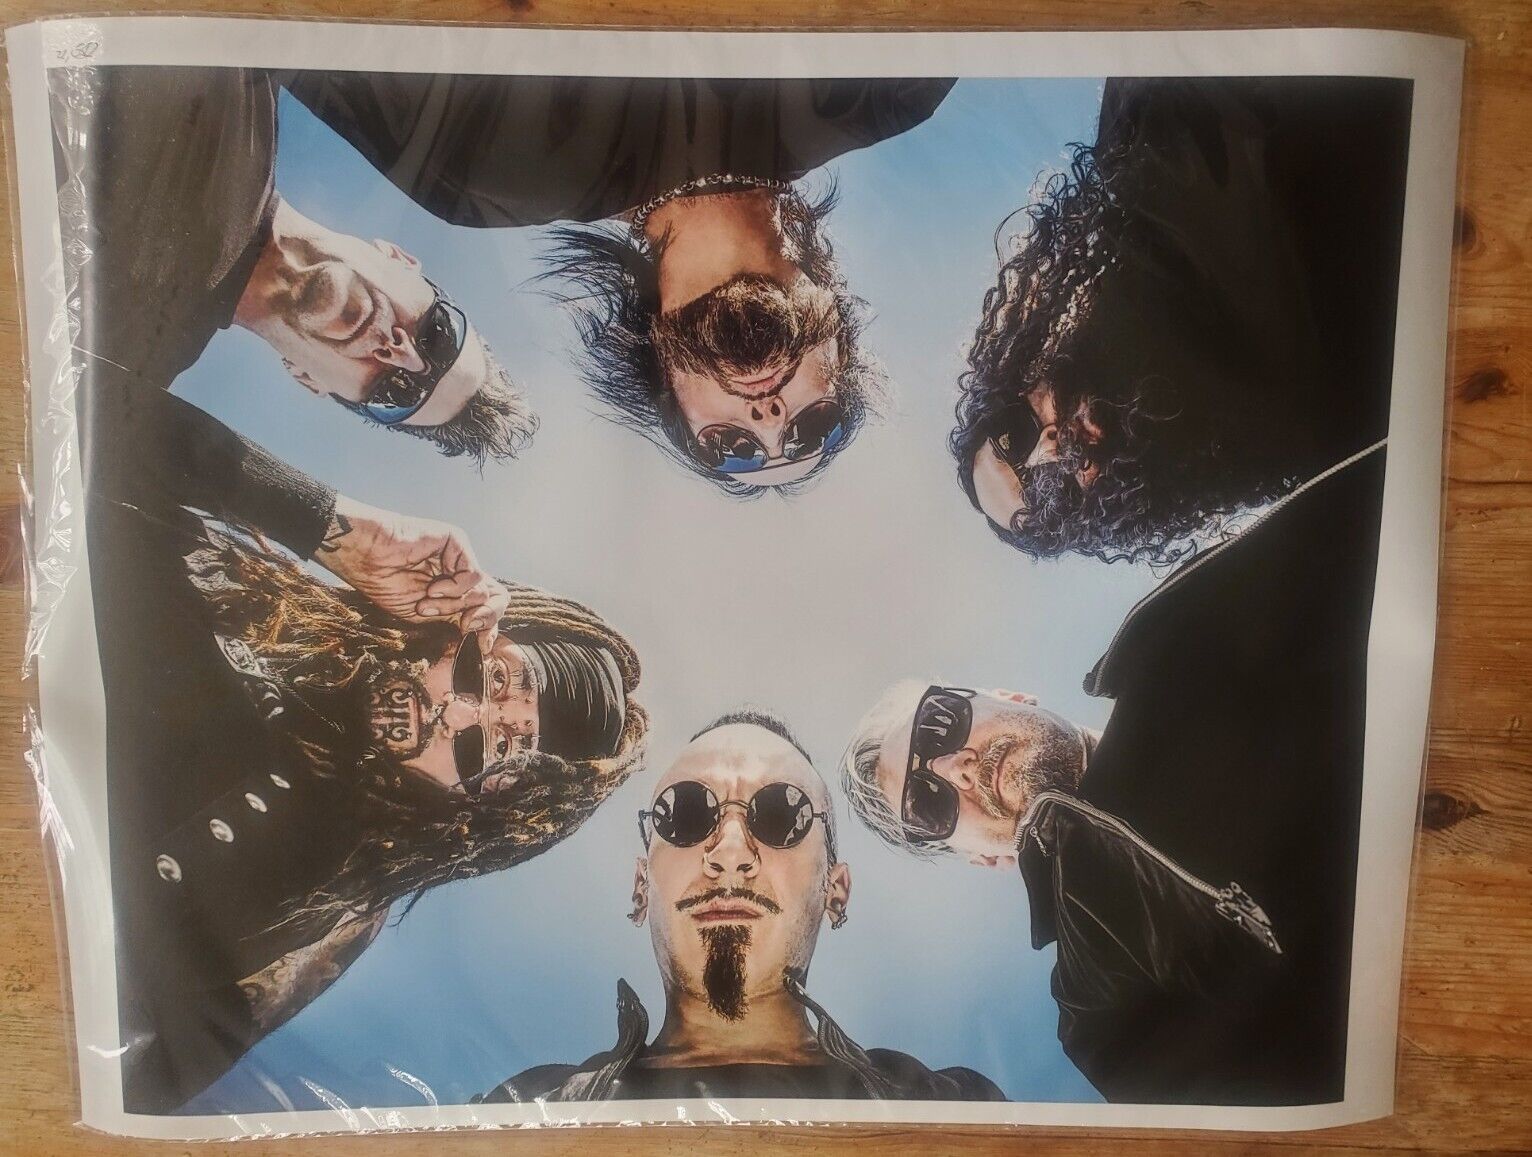 MINISTRY-EXTREMELY RARE-PHOTO-PRINT-POSTER SIZE-ARTIST SIGNED-DATED-2022-PERFECT